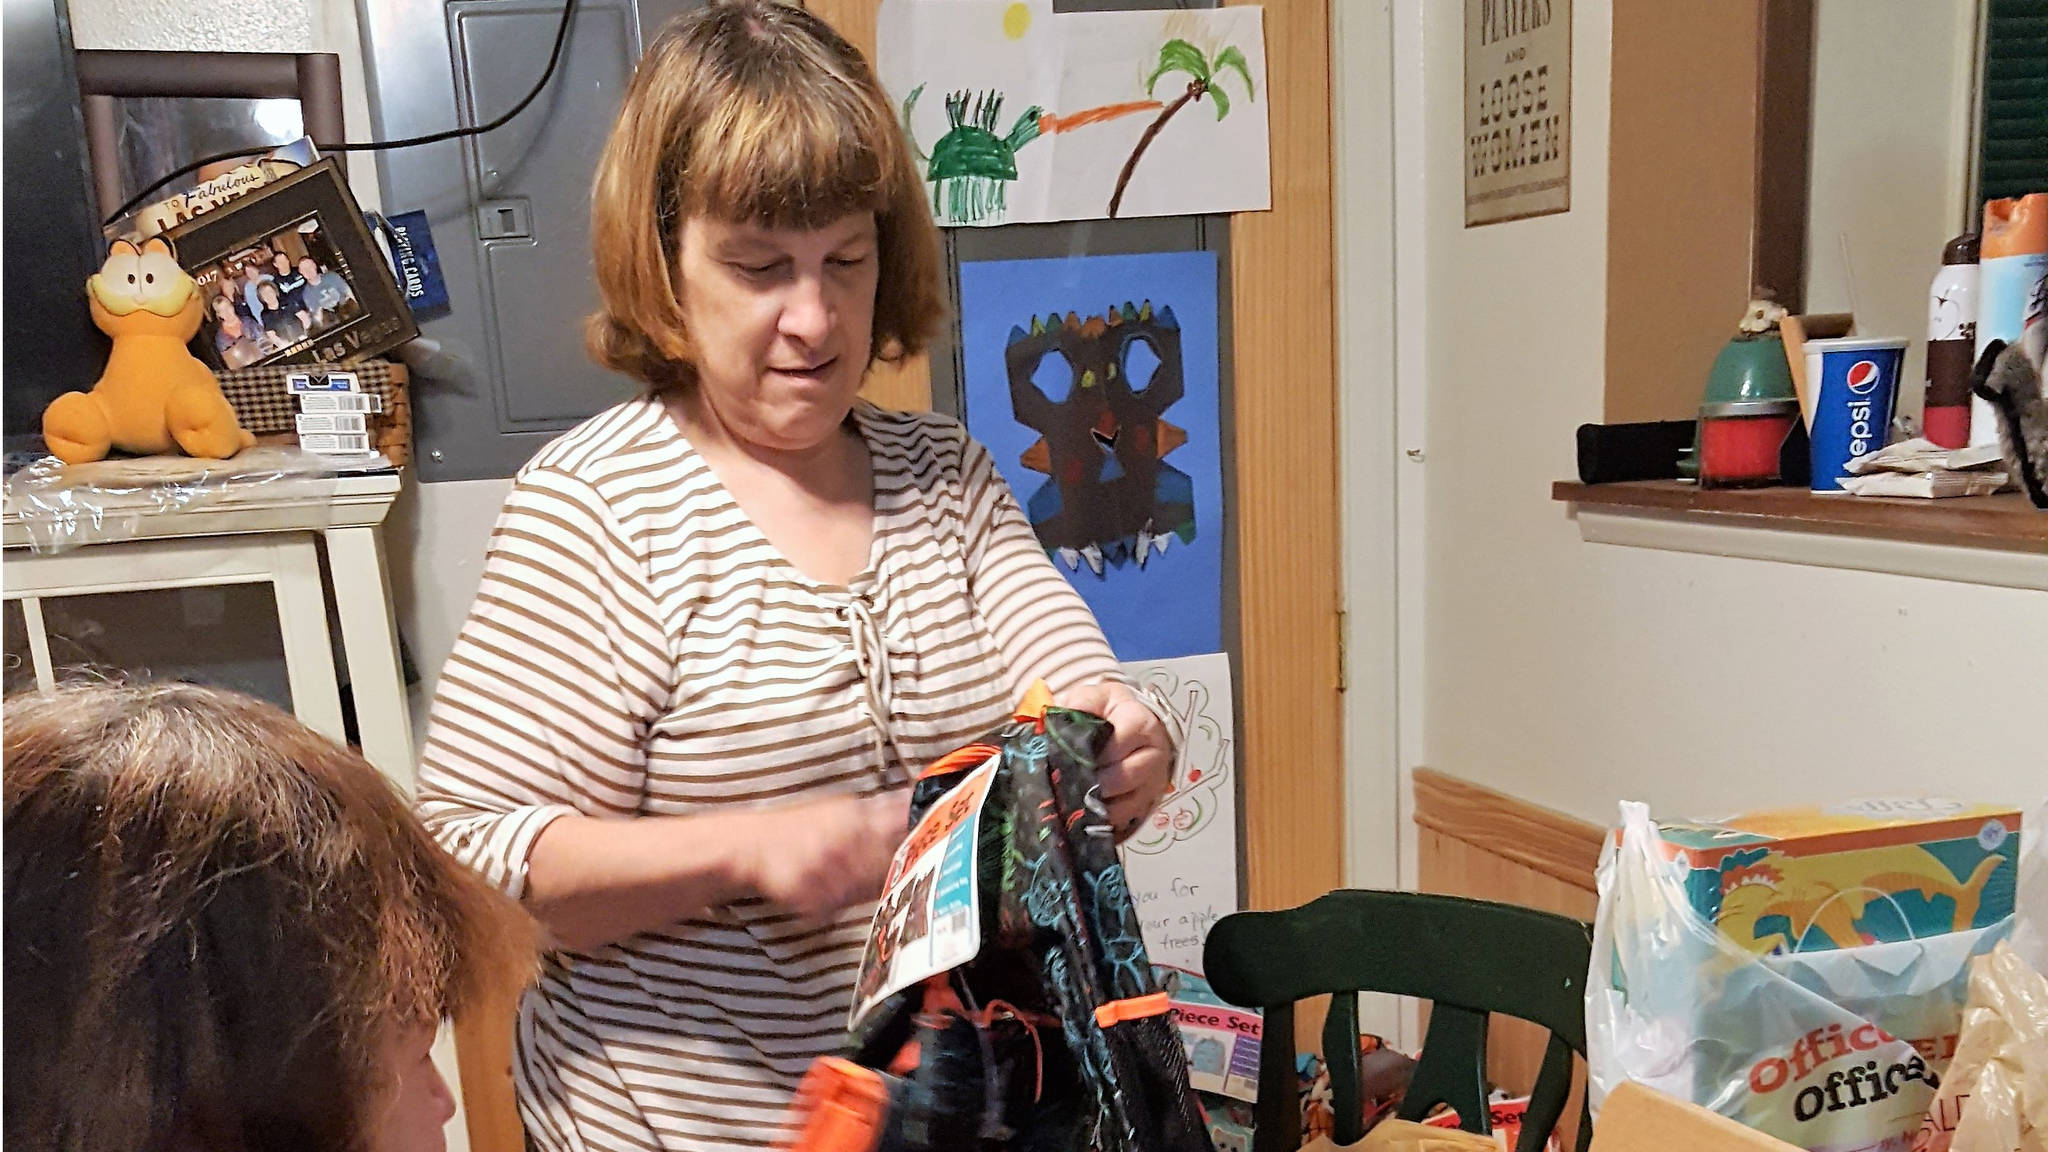 Suzanne Dutson stuffs backpacks with school supplies for children of incarcerated caregivers. (Photo courtesy Suzanne Dutson)